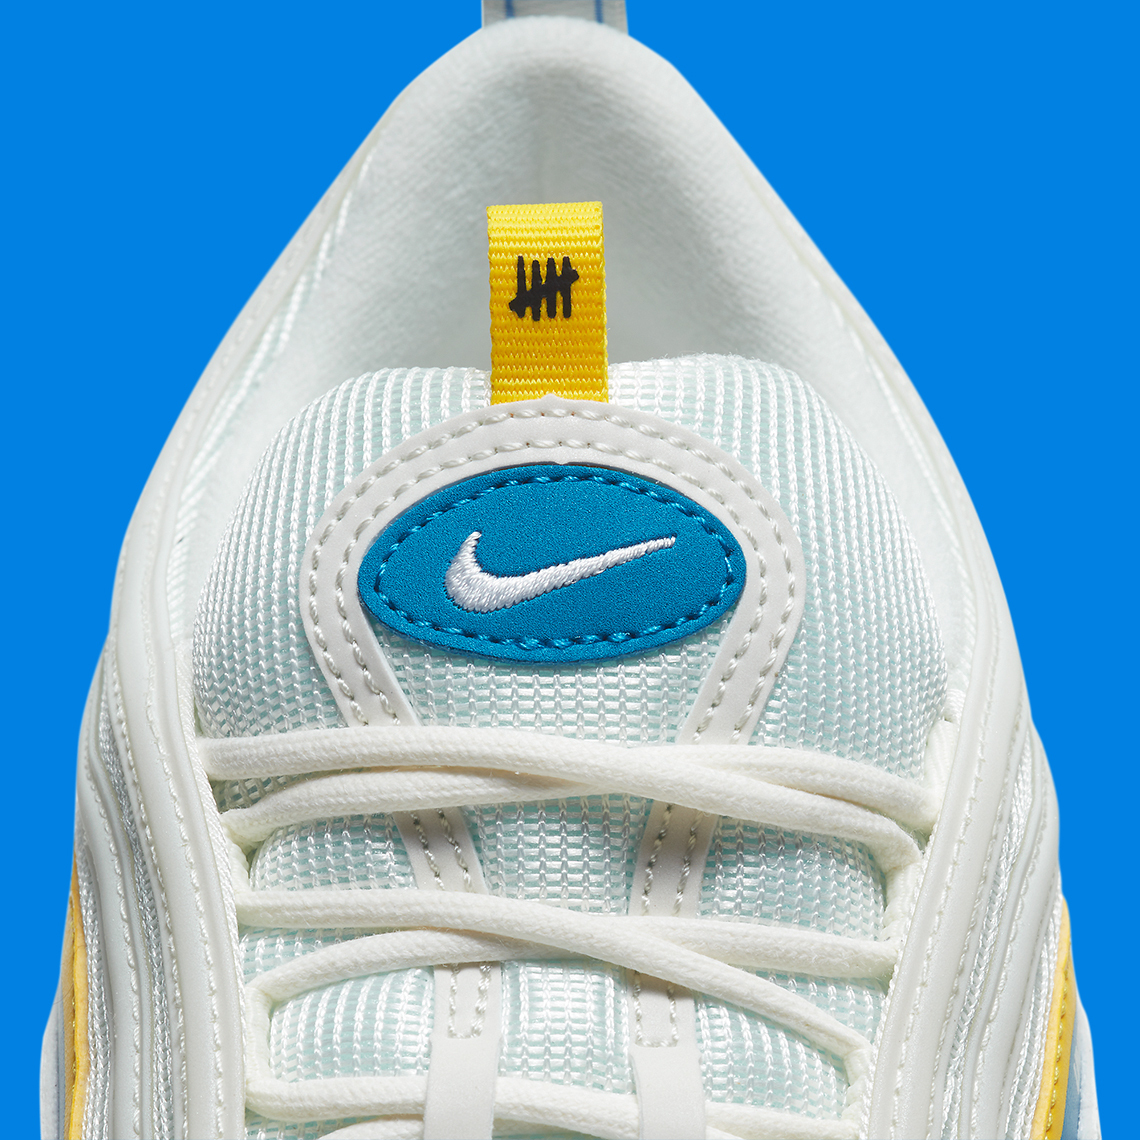 Nike Air Max 97 Undefeated Sail Aero Blue Midwest Gold Dc4830 100 9